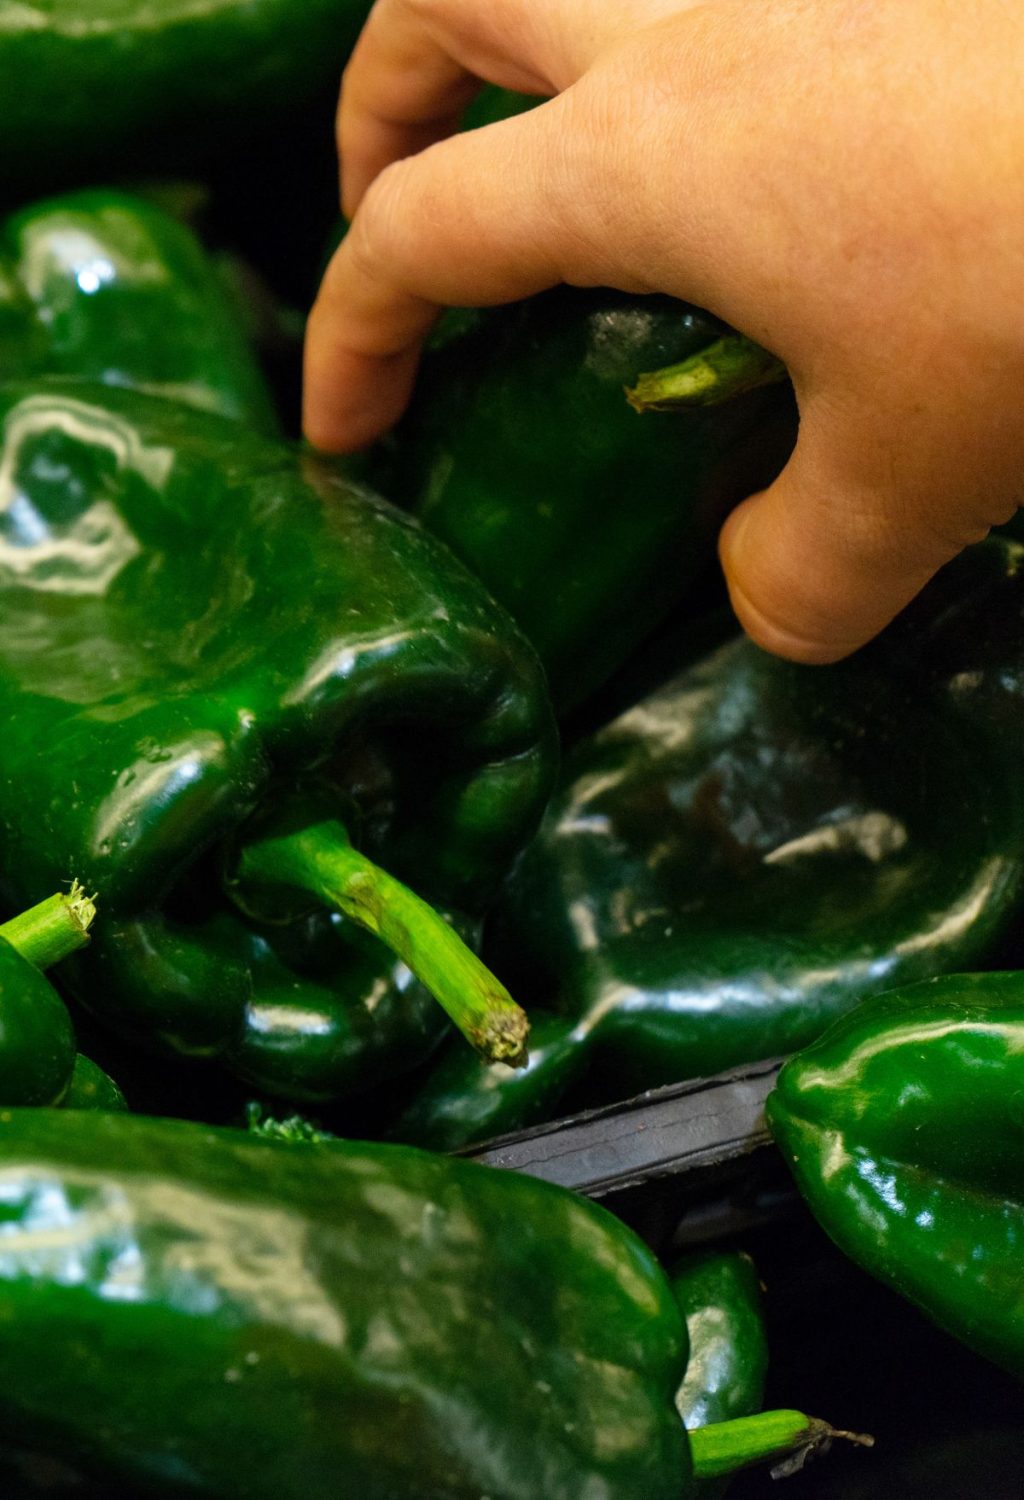 A person's hand picking up freeze poblano peppers.